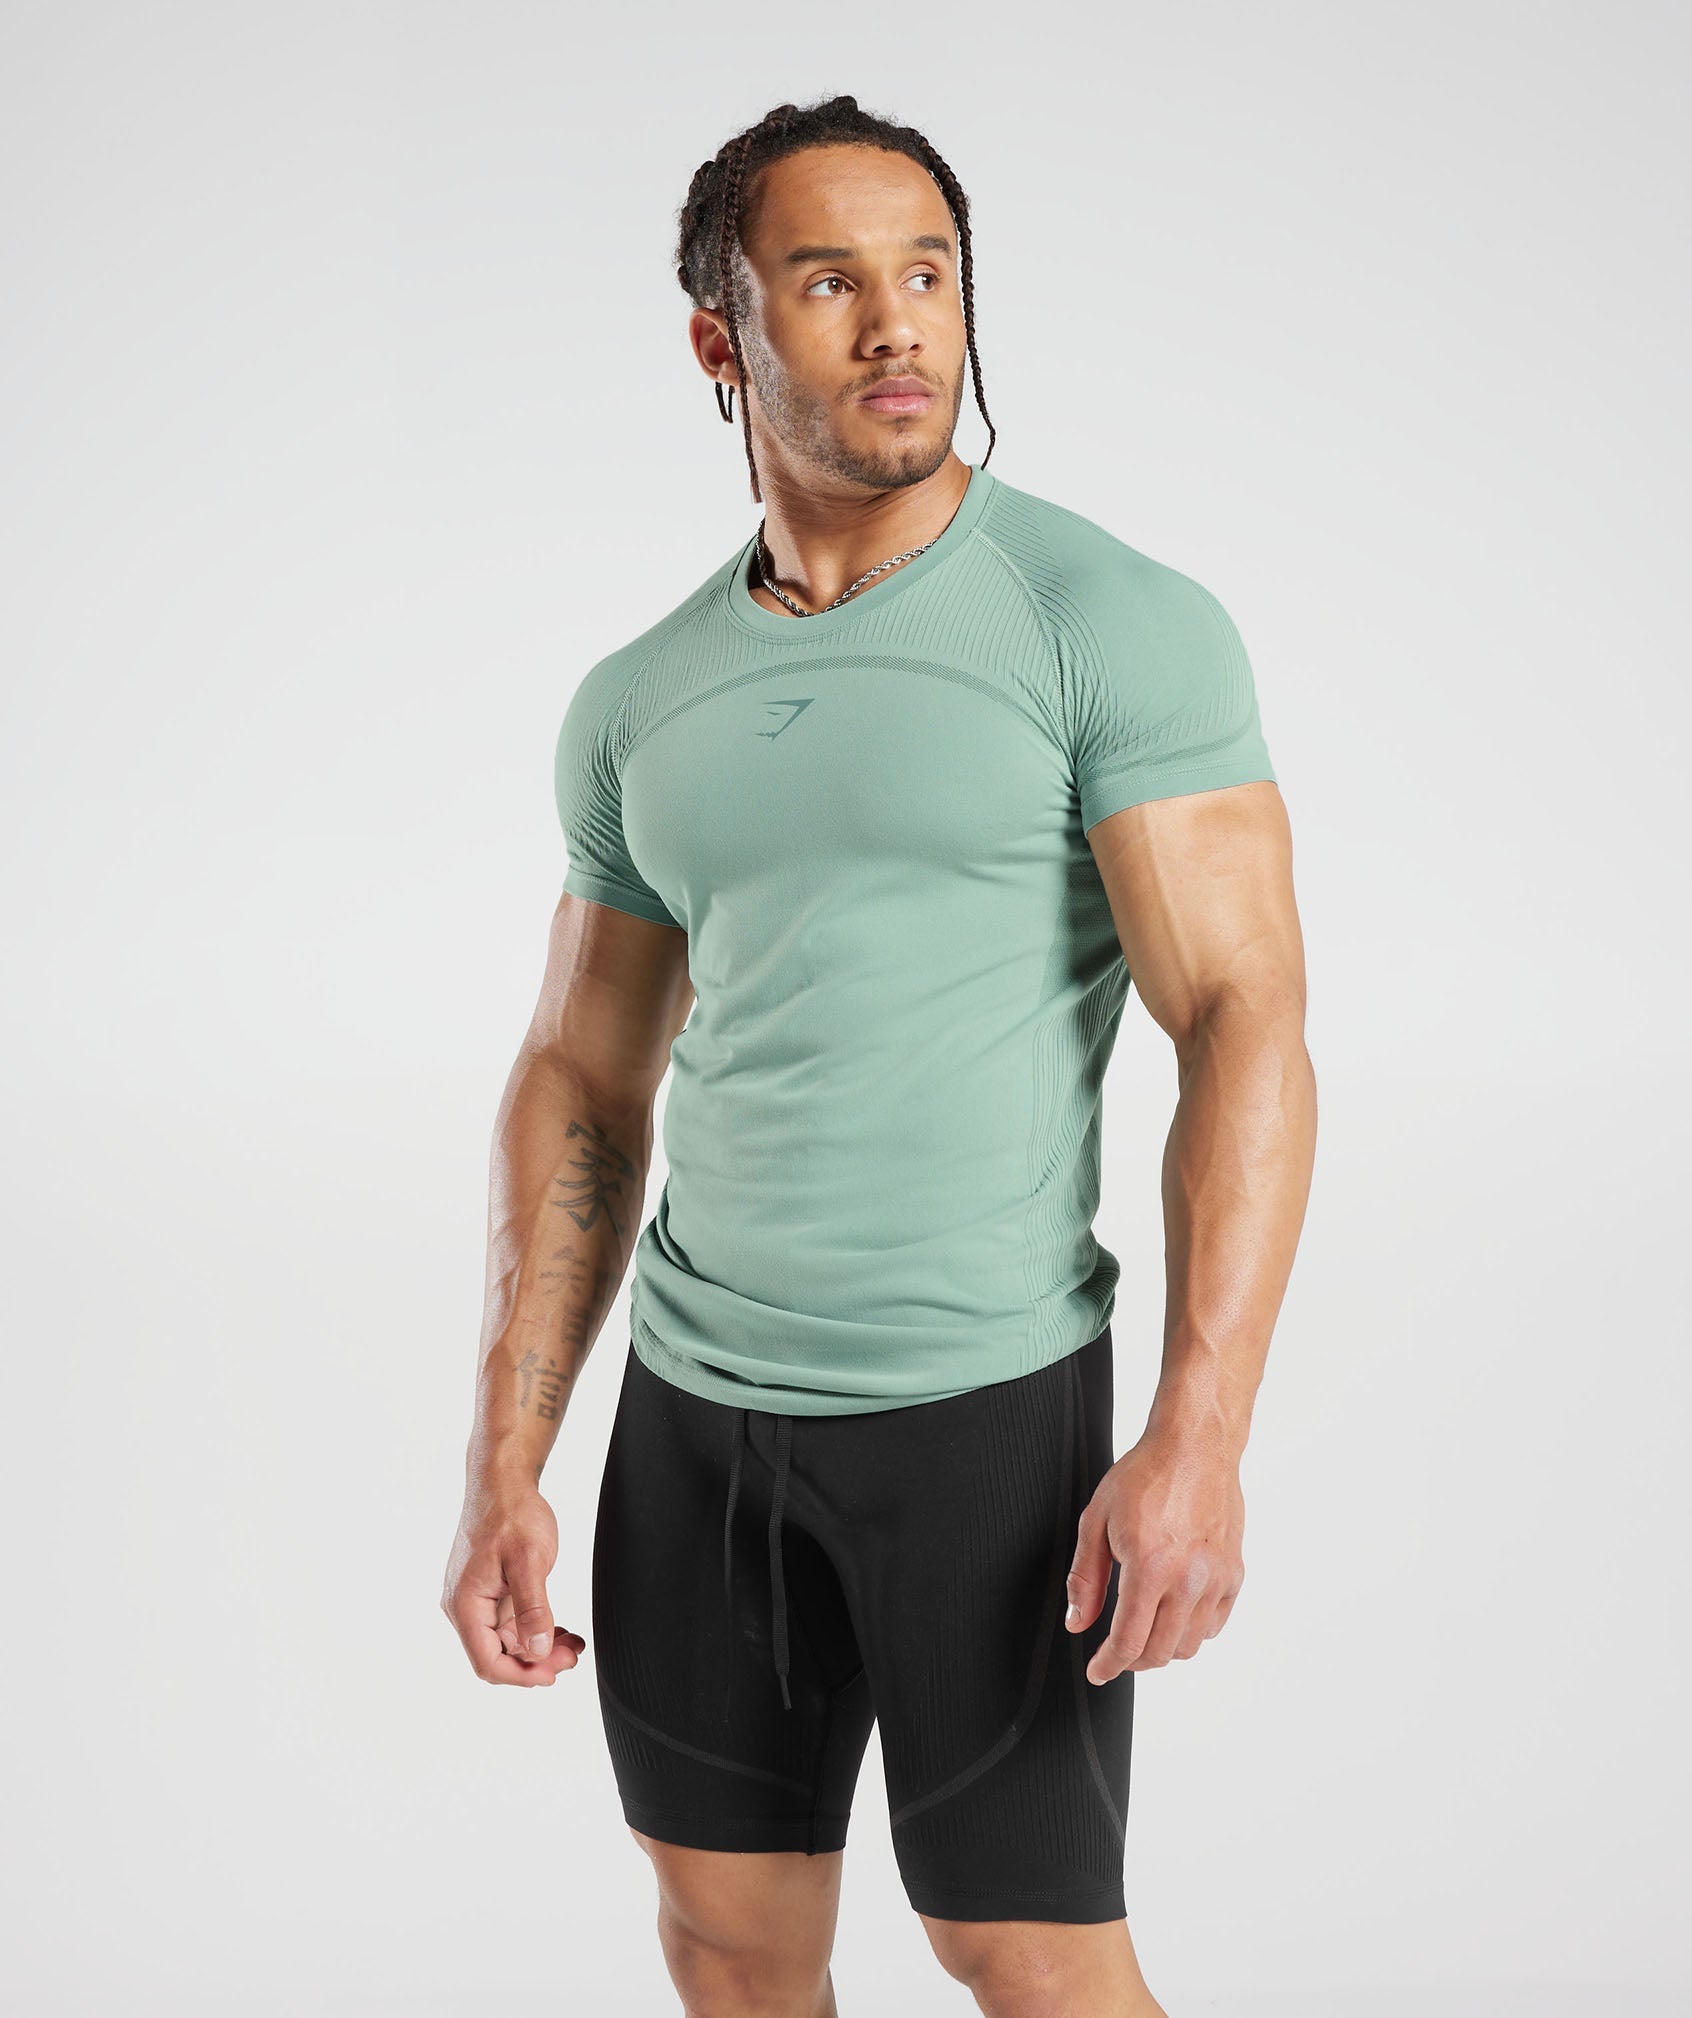 315 Seamless T-Shirt in Frost Teal/Ink Teal - view 3